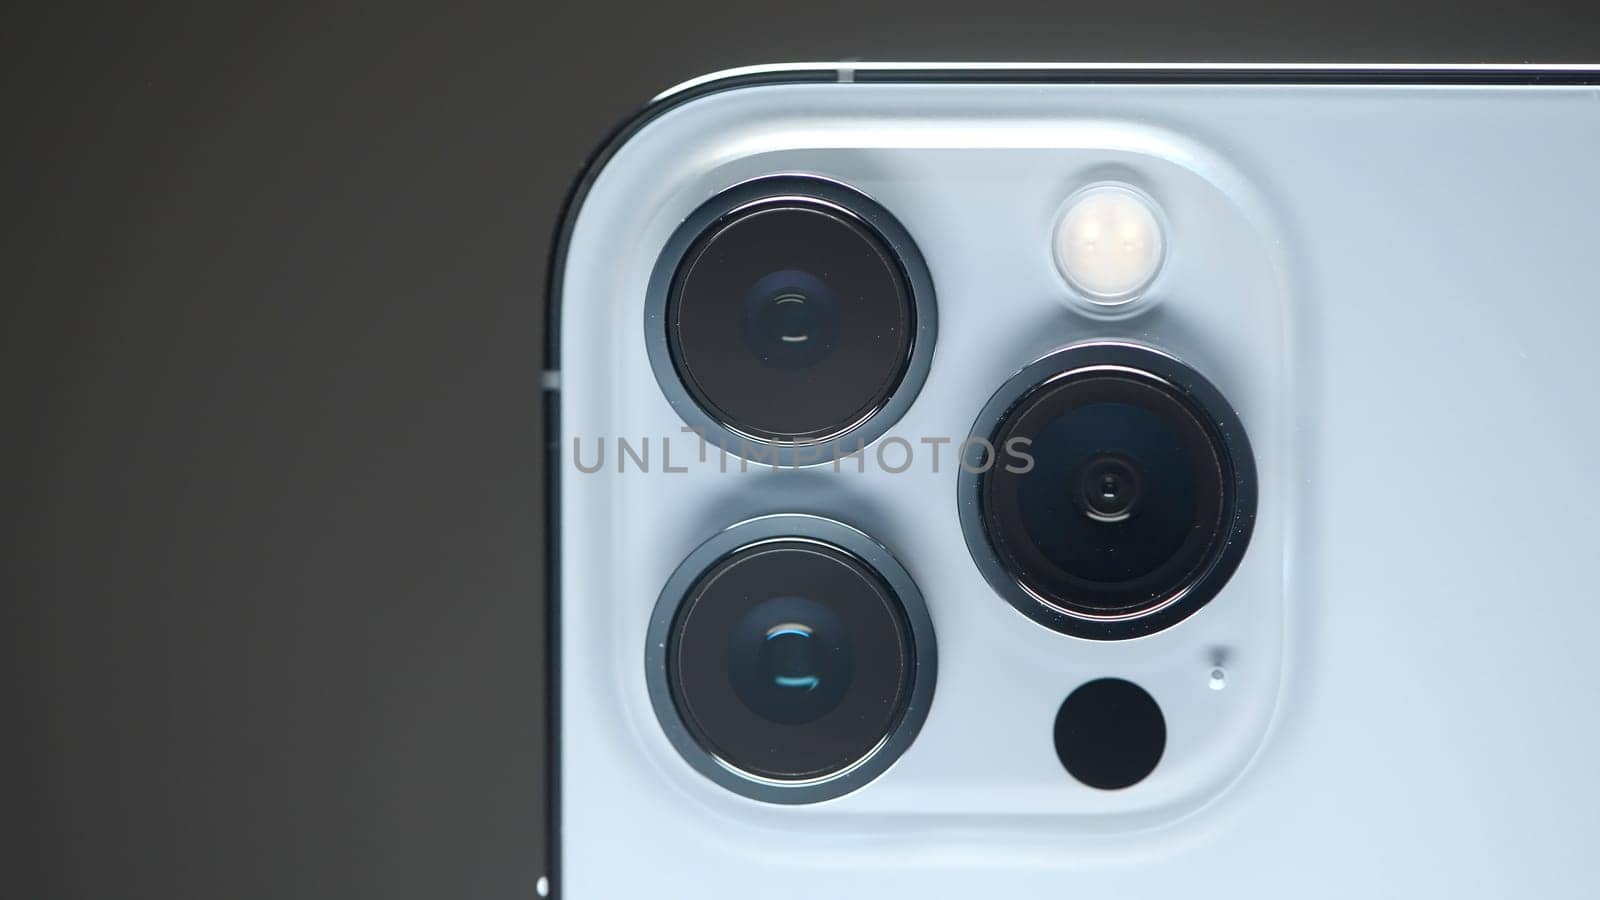 New iPhone. Action.New technology development concept with three cameras and new packaged box. Use for editorial only. High quality 4k footage